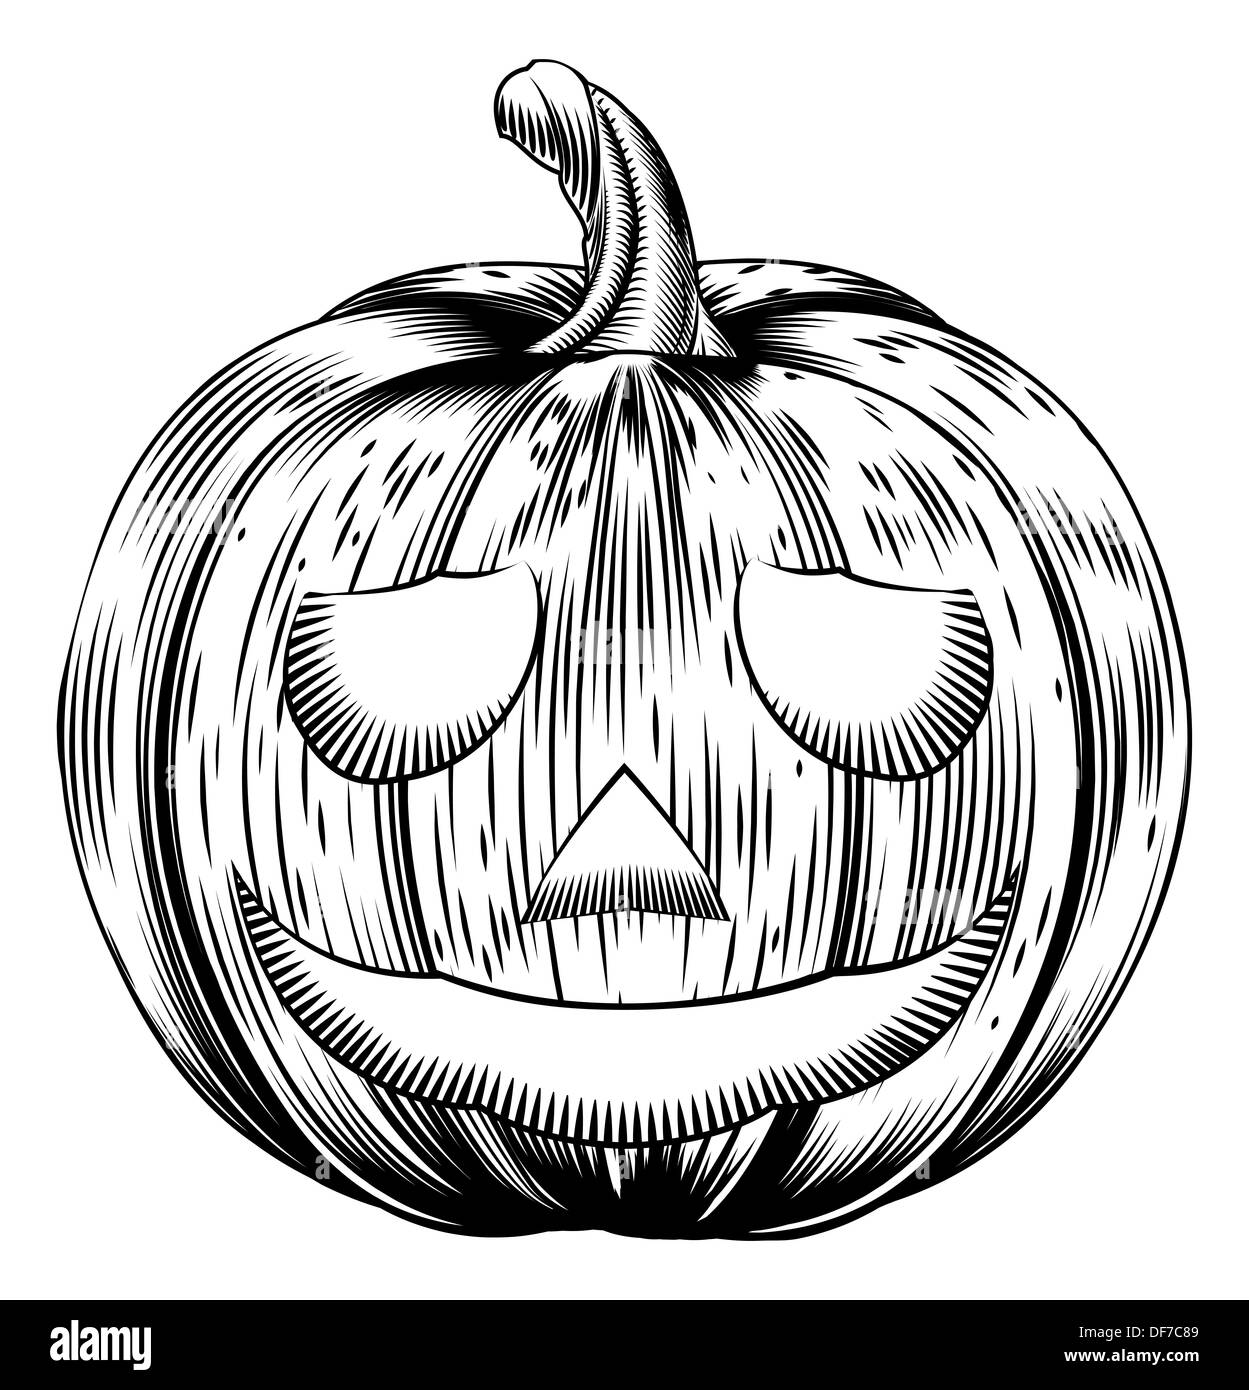 A Halloween pumpkin in a retro vintage woodblock or woodcut etching style Stock Photo